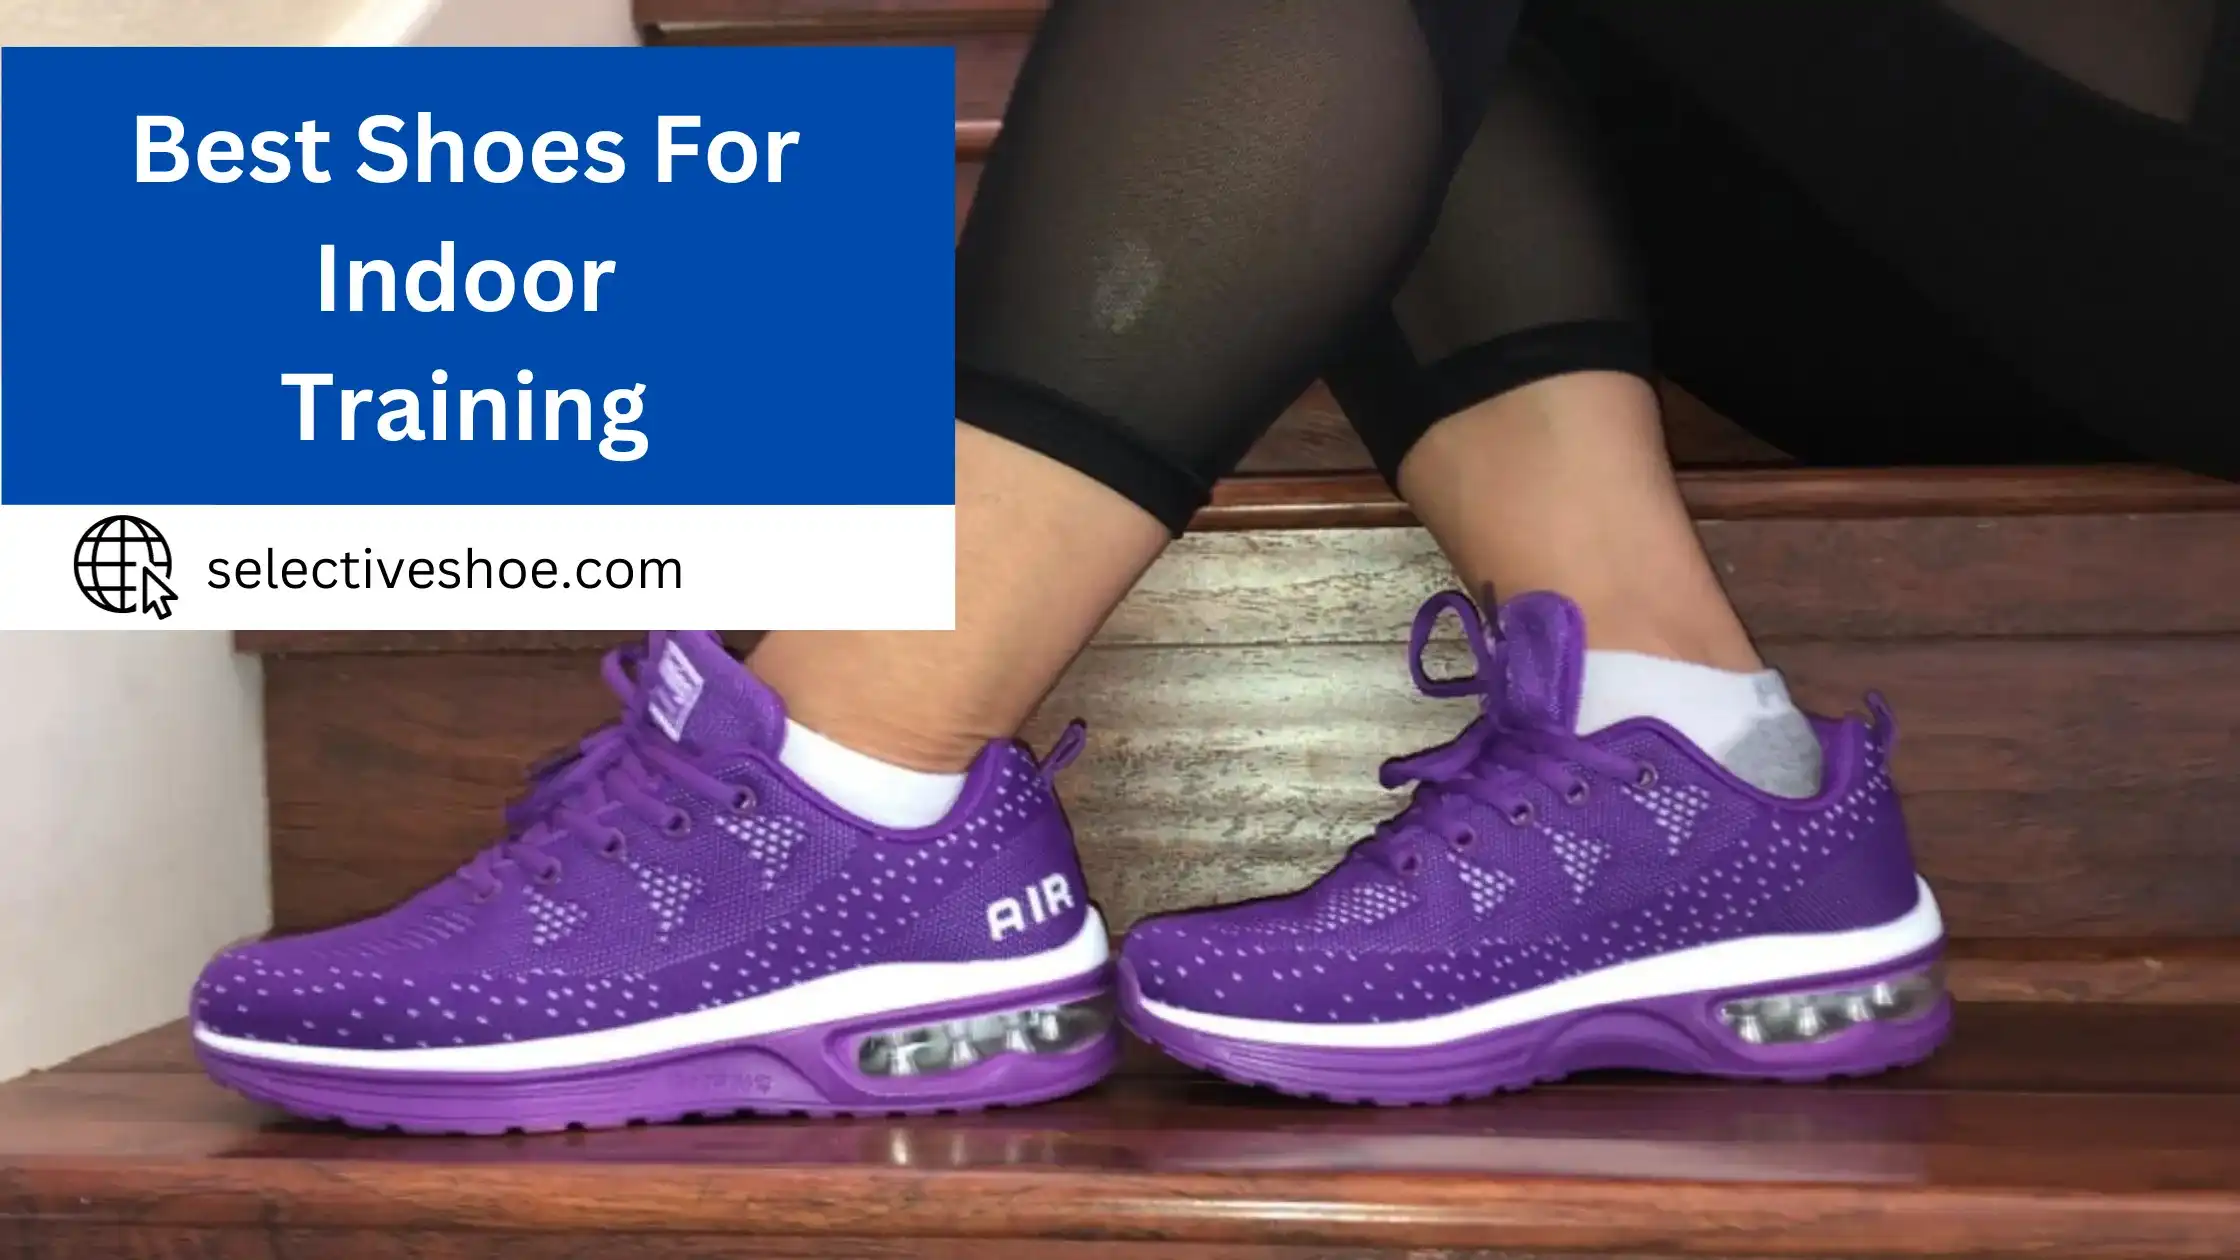 Unbiased Reviews of Top 10 Best Shoes For Indoor Training